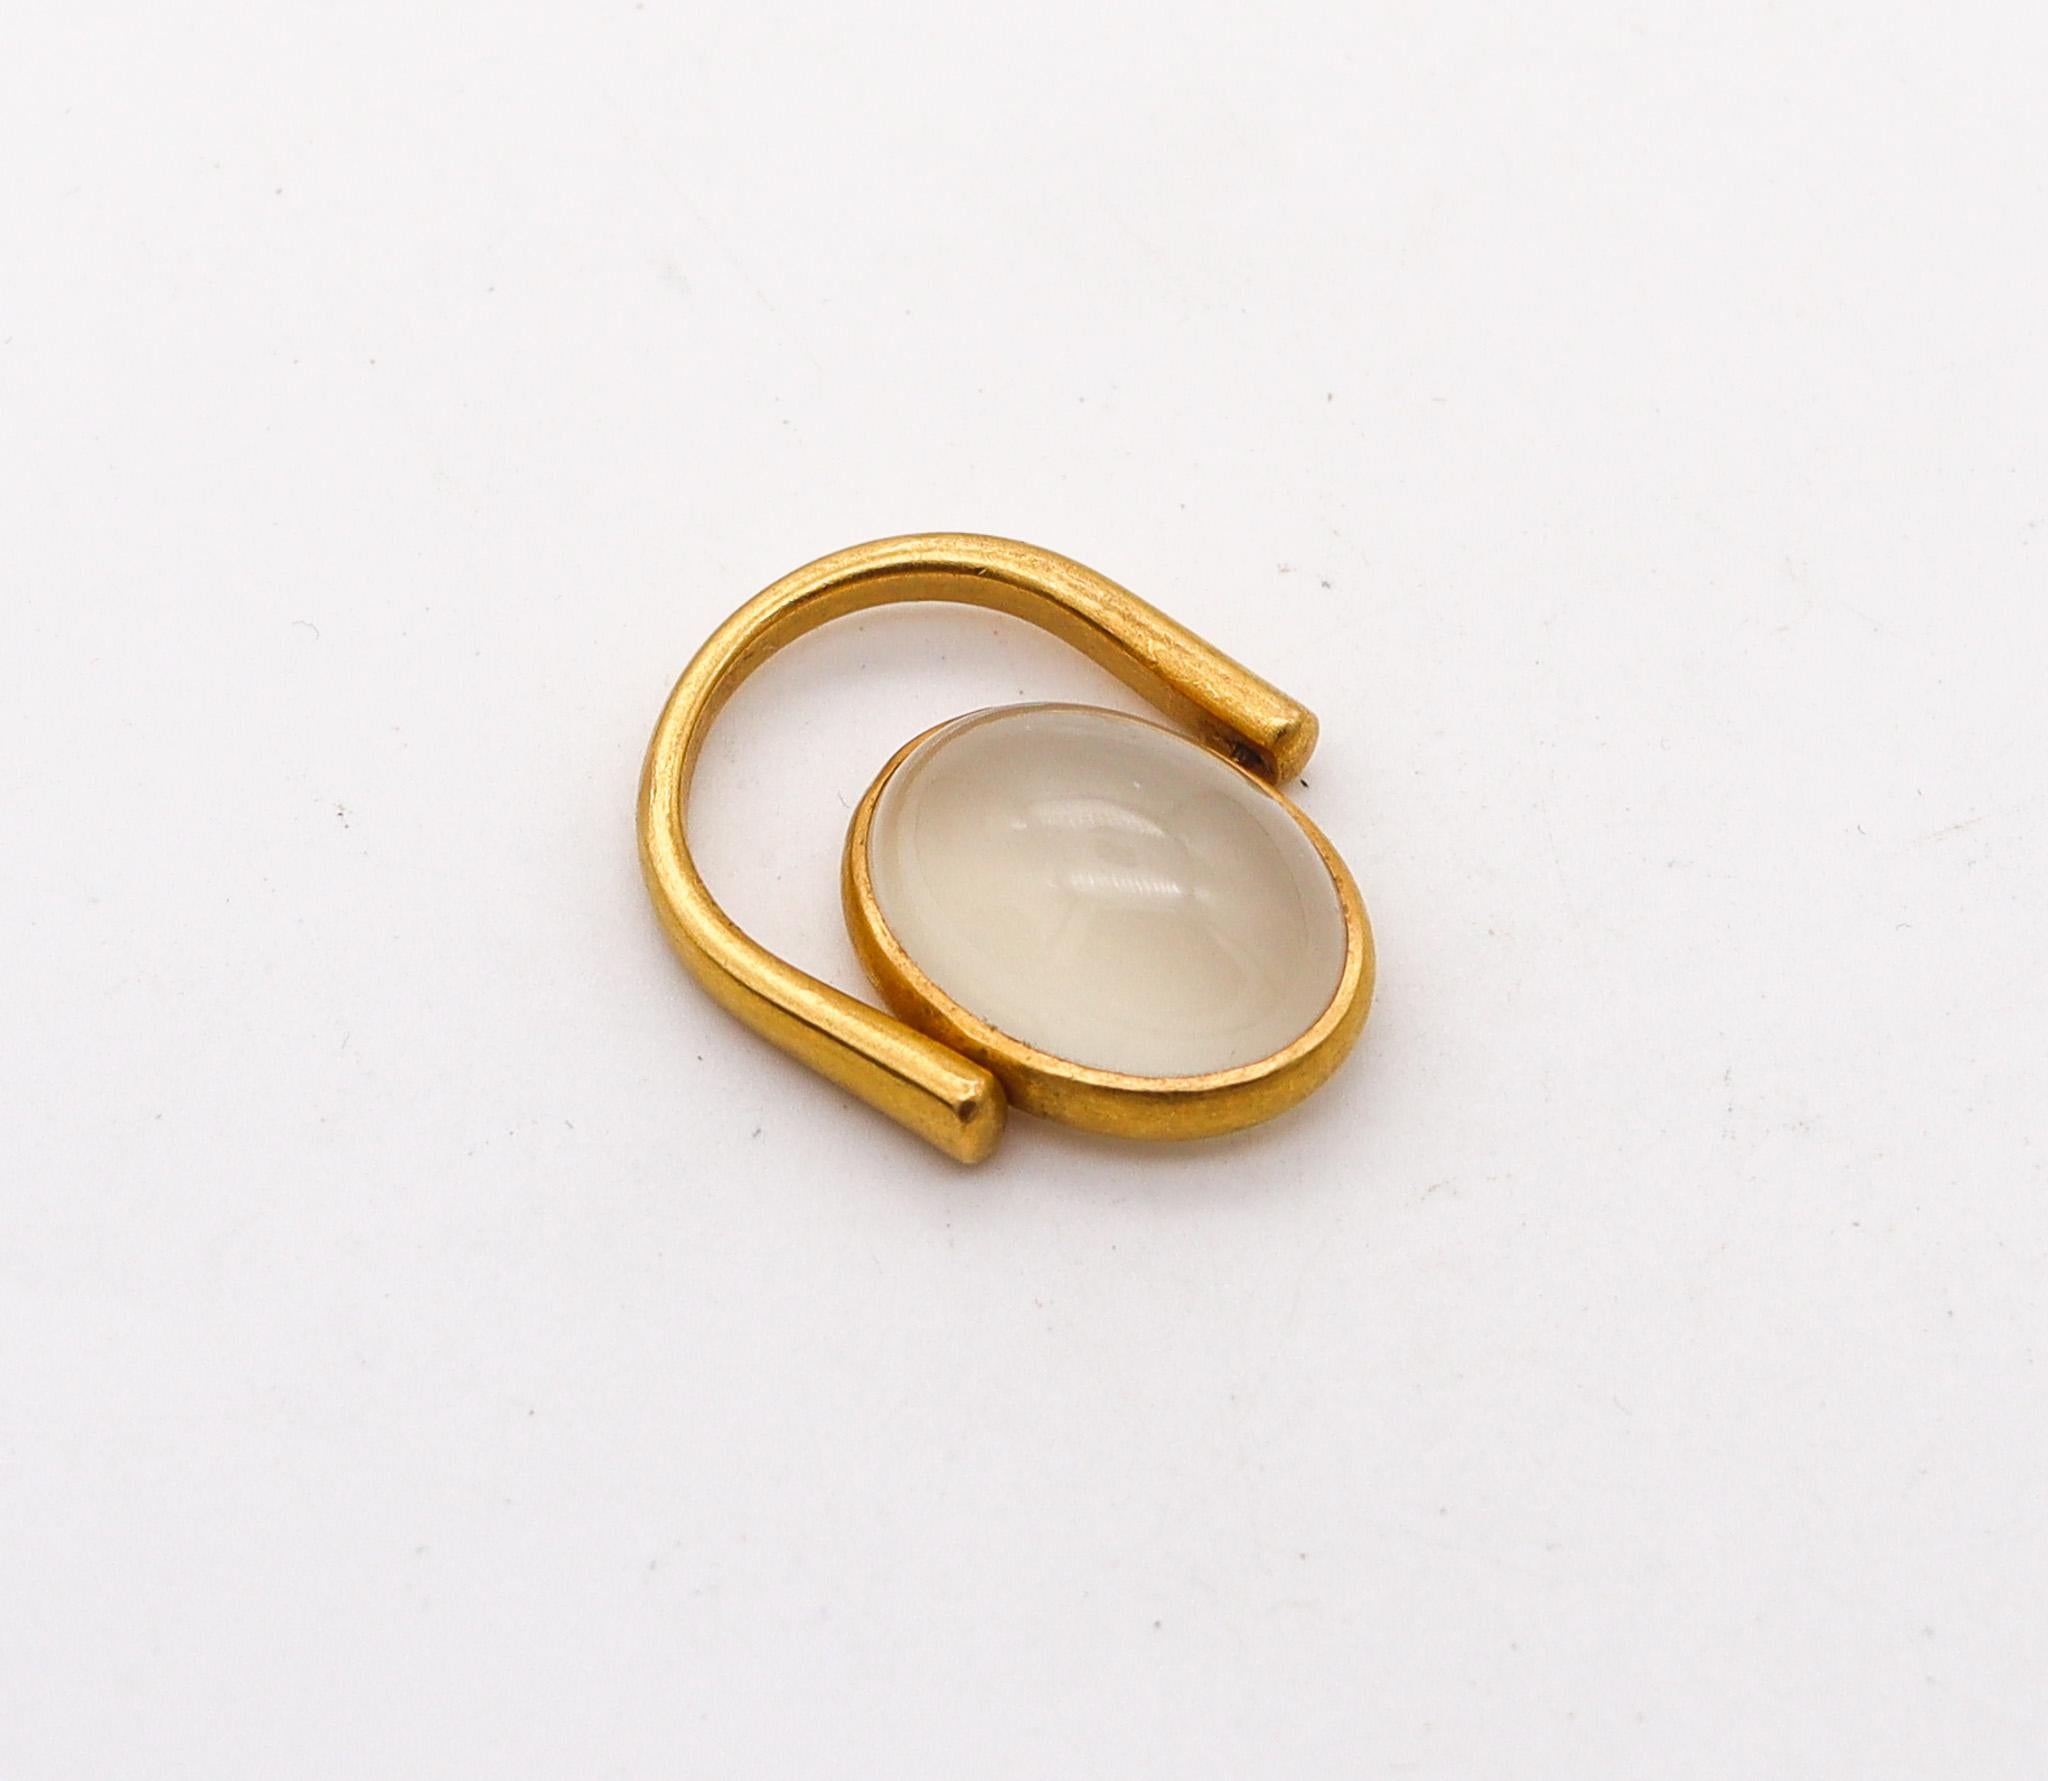 Cabochon Roman Revival Signet Ring In 18Kt Yellow Gold With 18.49 Ctw Cat's Eye Moonstone For Sale